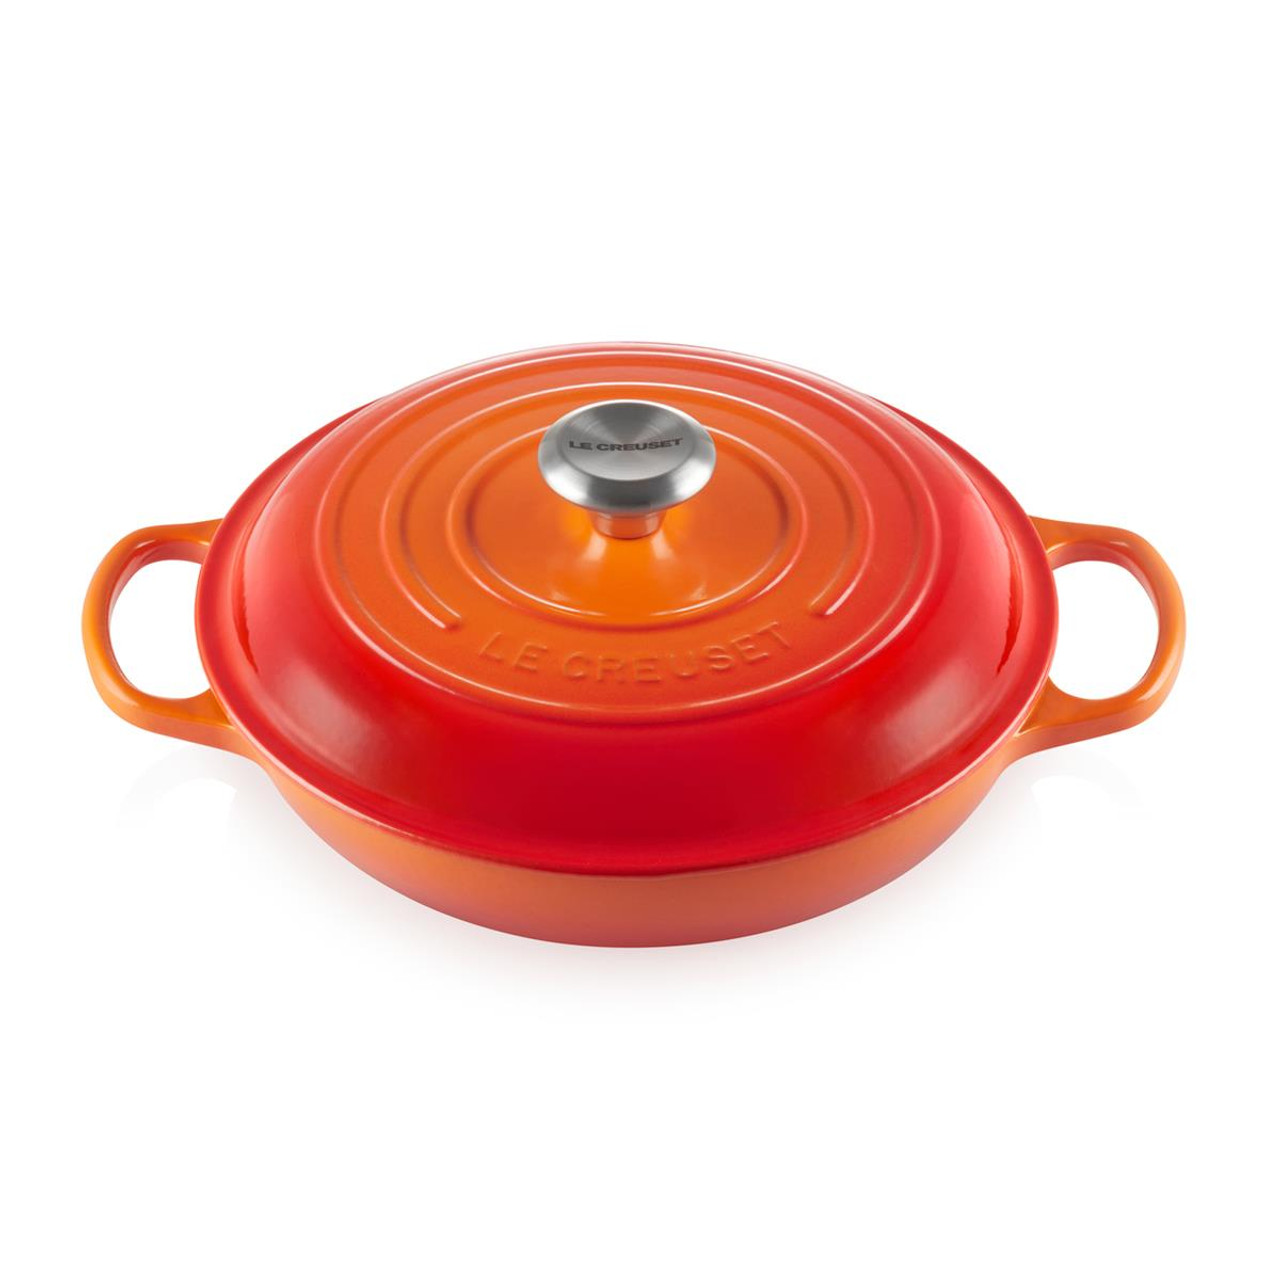 How easy is it to clean a Le Creuset Shallow Casserole dish?